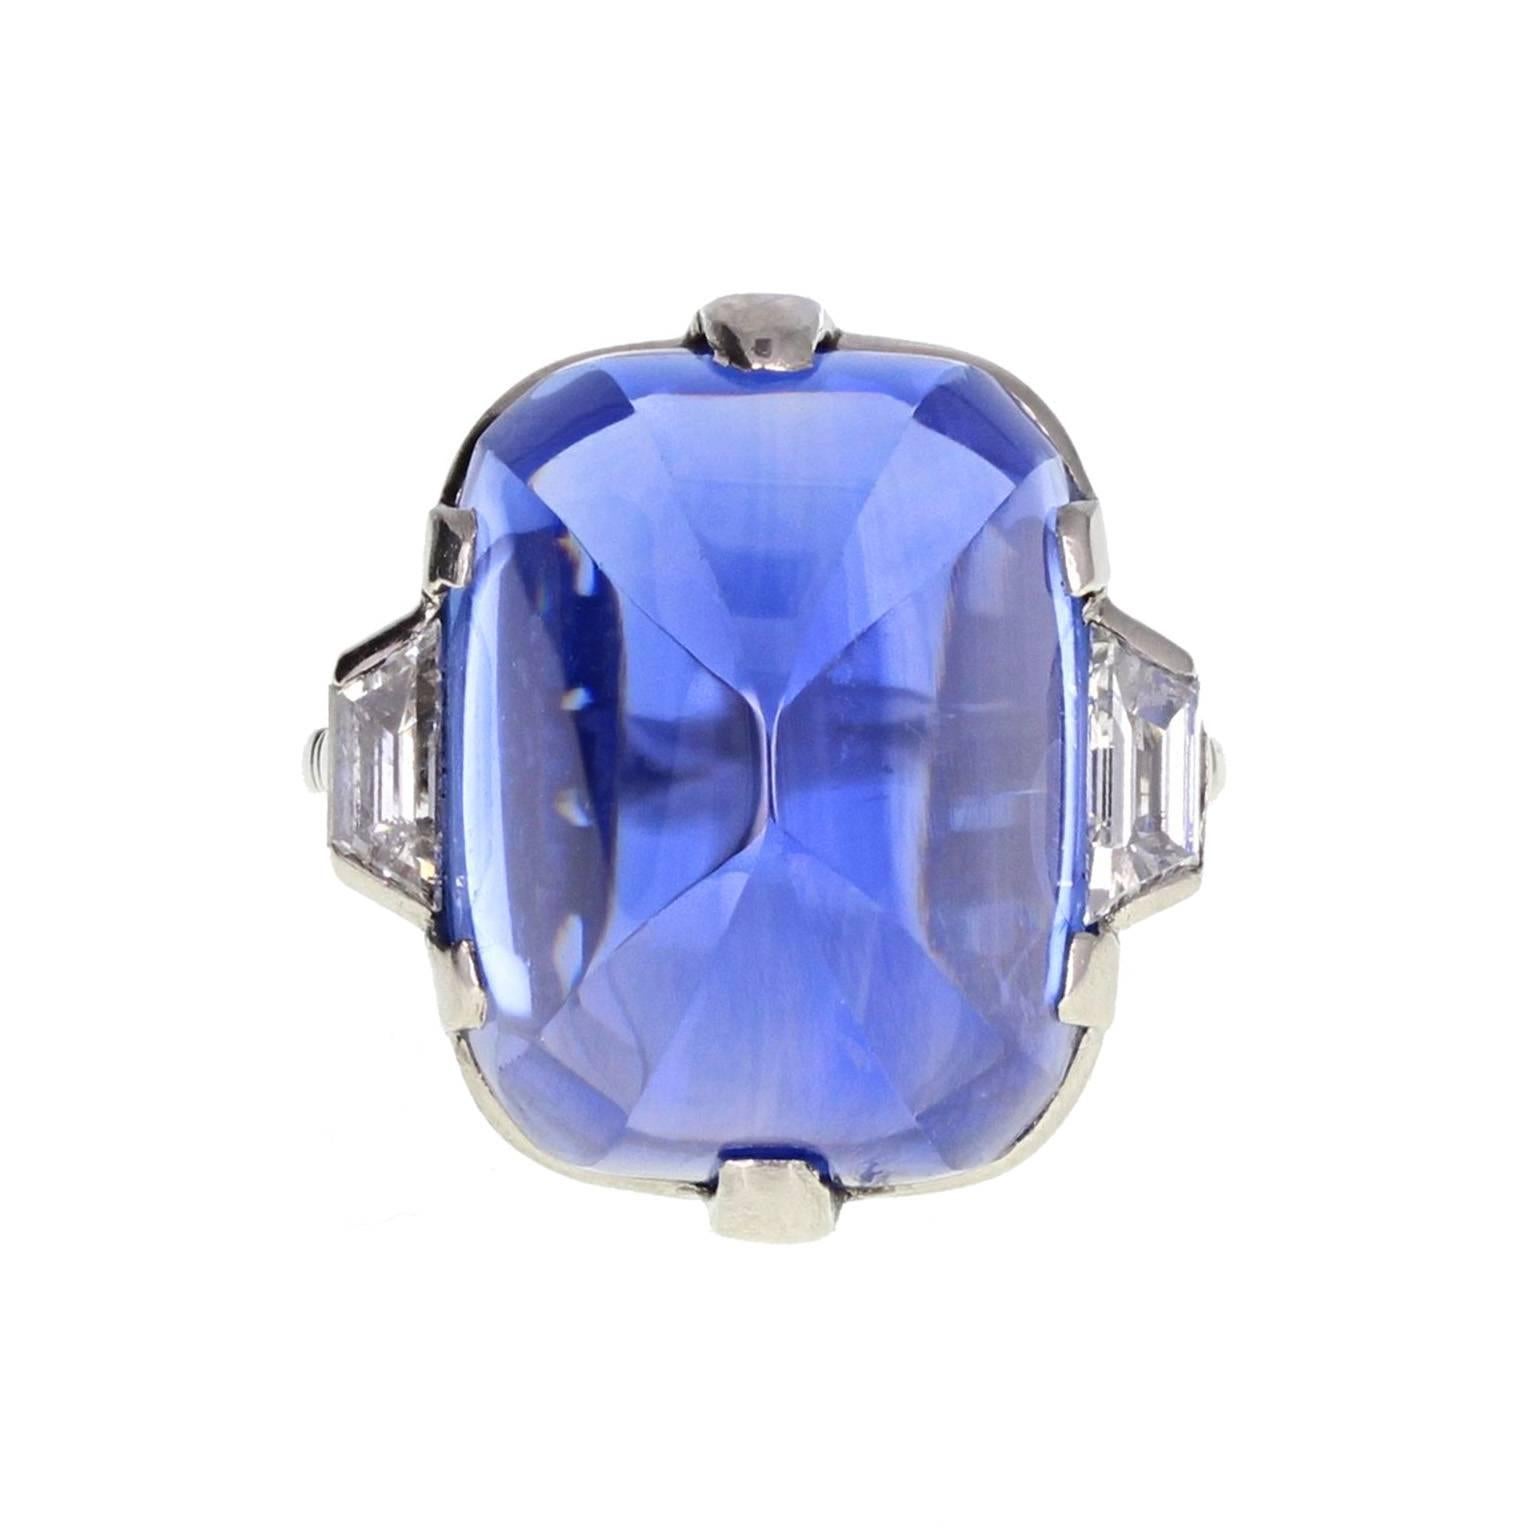 This exquisite Art Deco ring features a stunning 'Sugarloaf' sapphire with unusual and beautiful faceted corners. Accompanied by a certificate stating that the sapphire is a massive 30 carats, is from Ceylon and has not be subjected to any form of